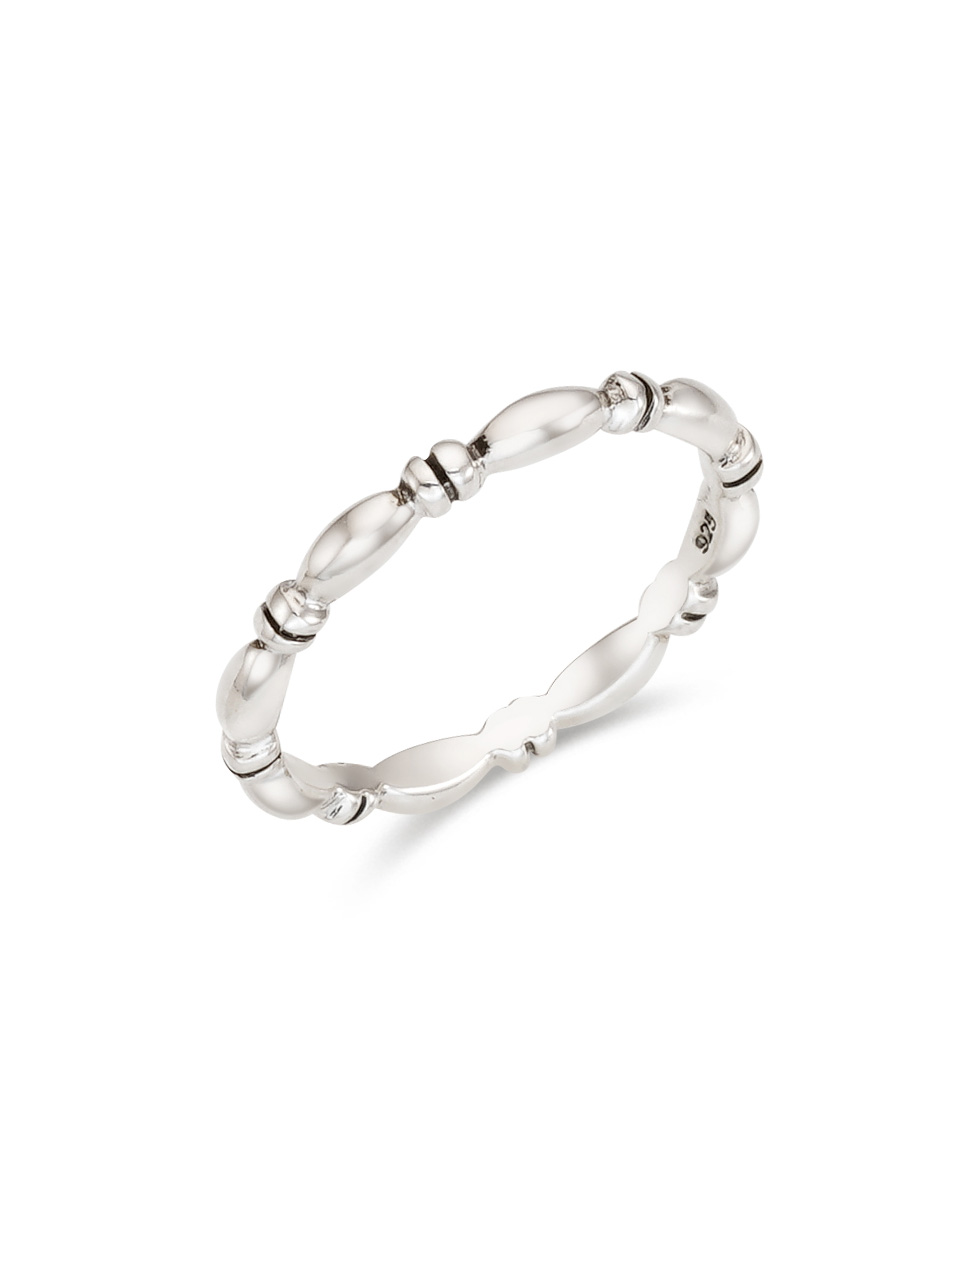 [silver925]soft ring